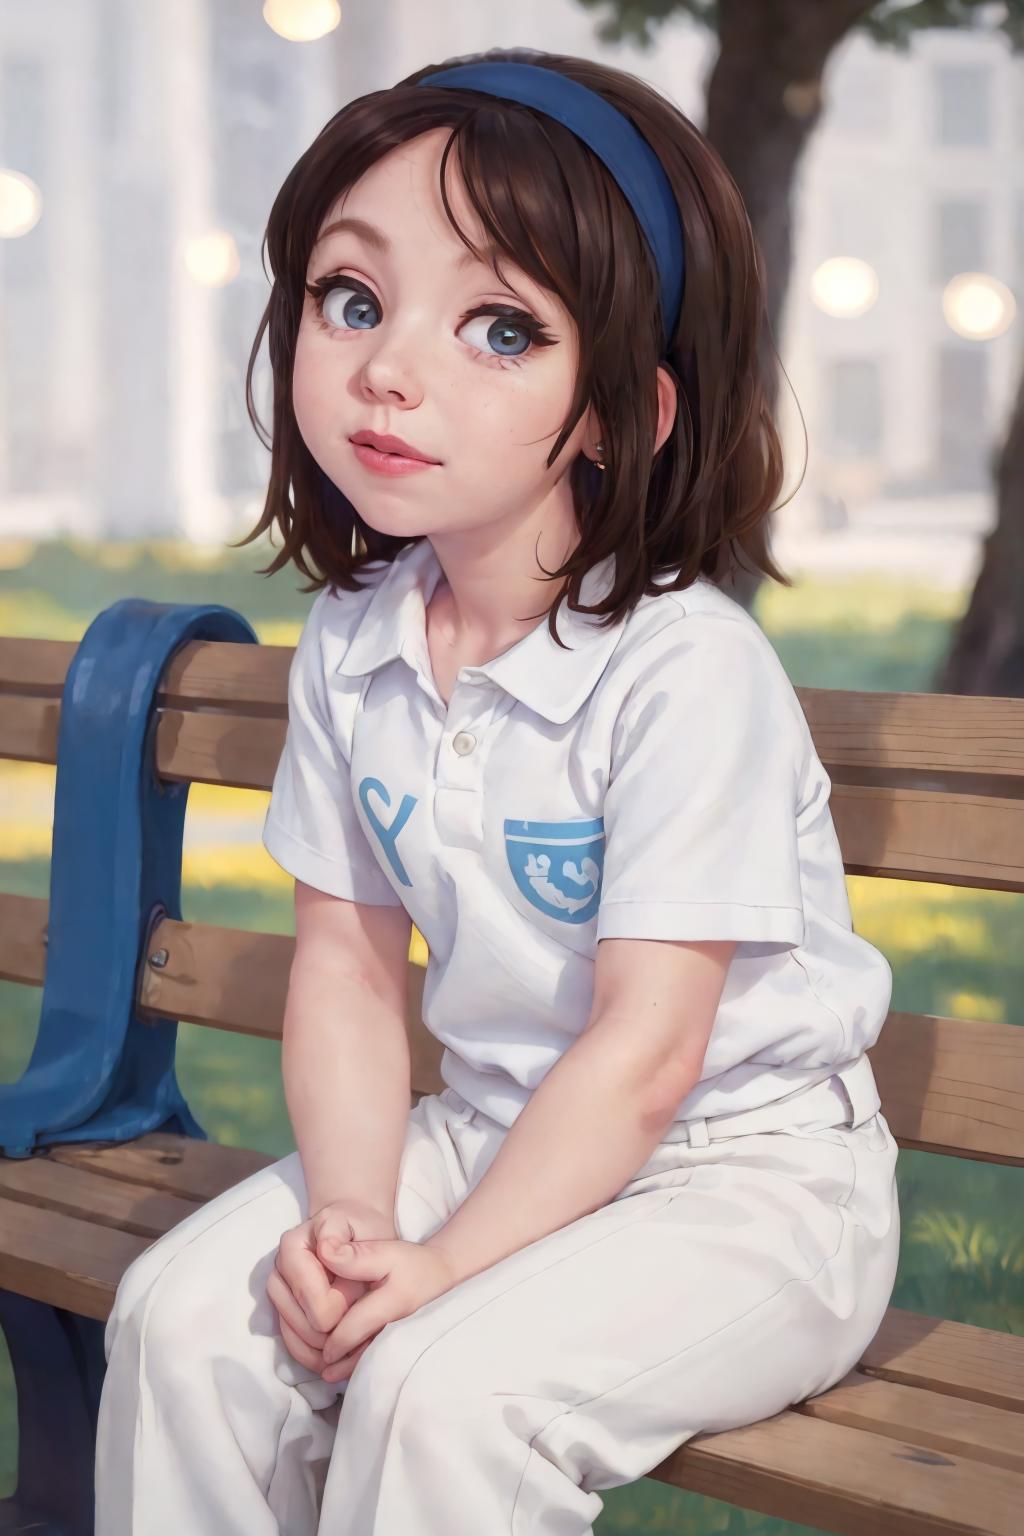 A young girl with long eyelashes, a blue bow headband, and a white shirt with blue writing sitting on a bench.